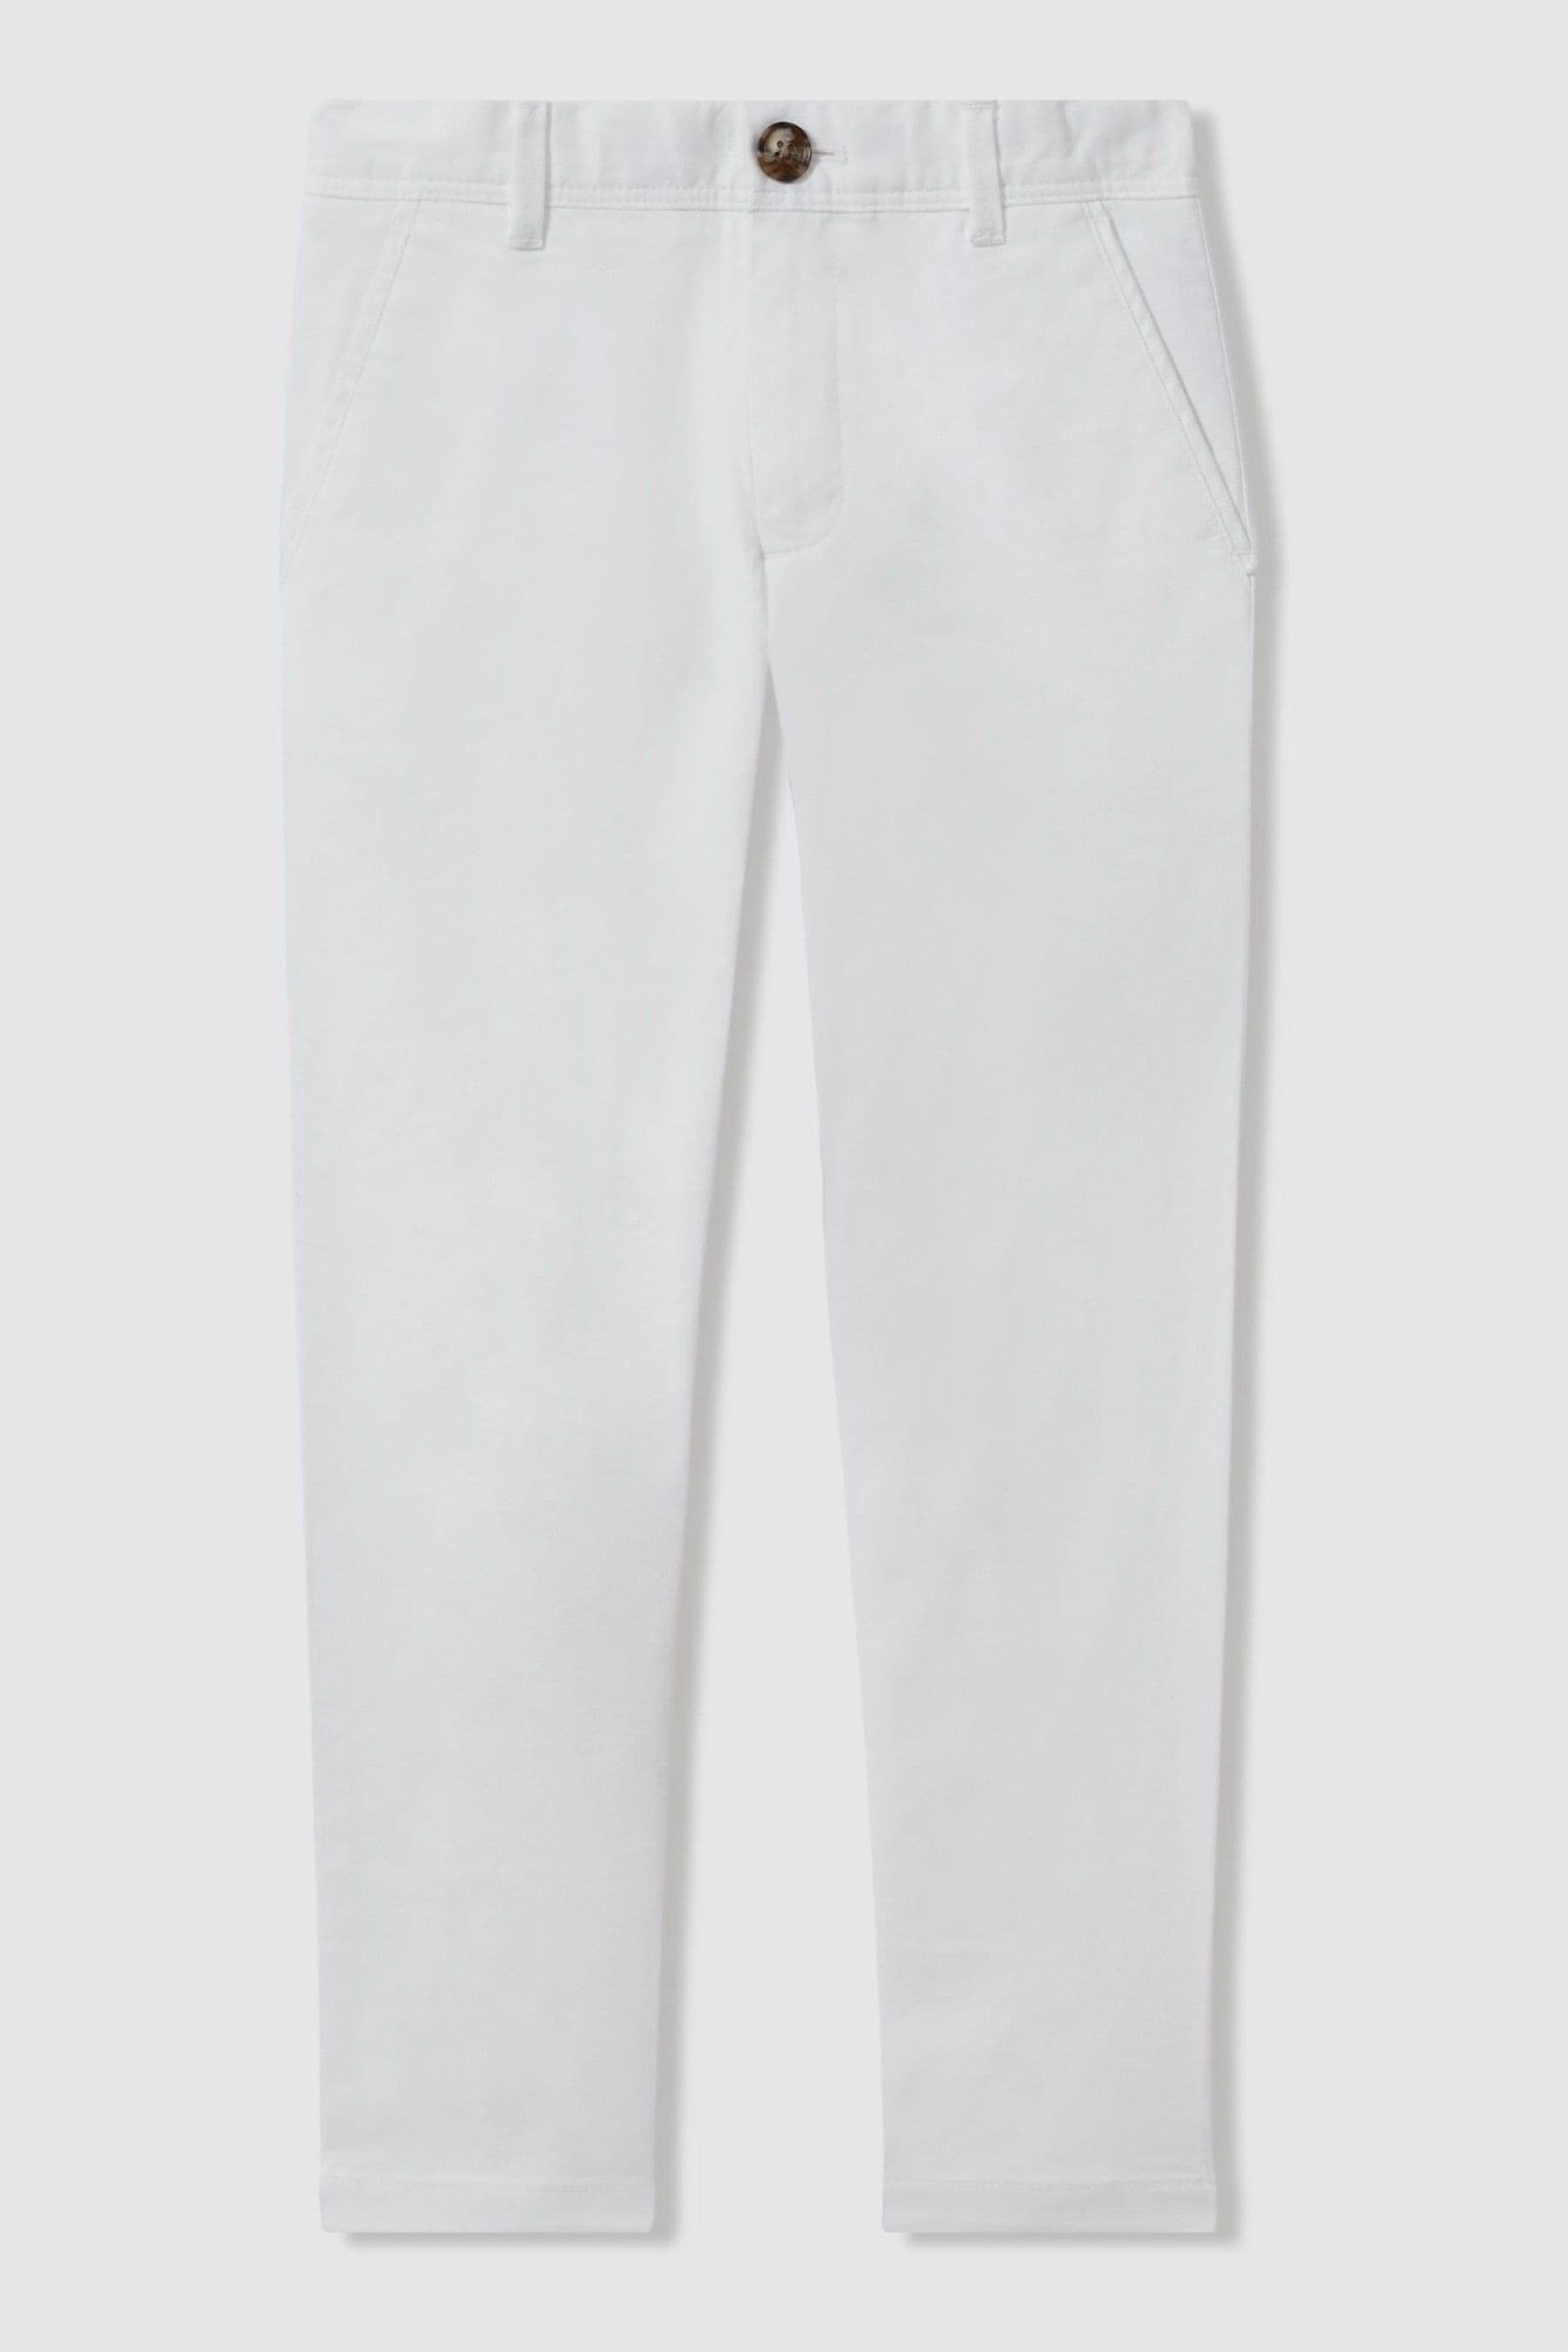 Reiss Pitch - White Slim Fit Casual Chinos, Uk 13-14 Yrs